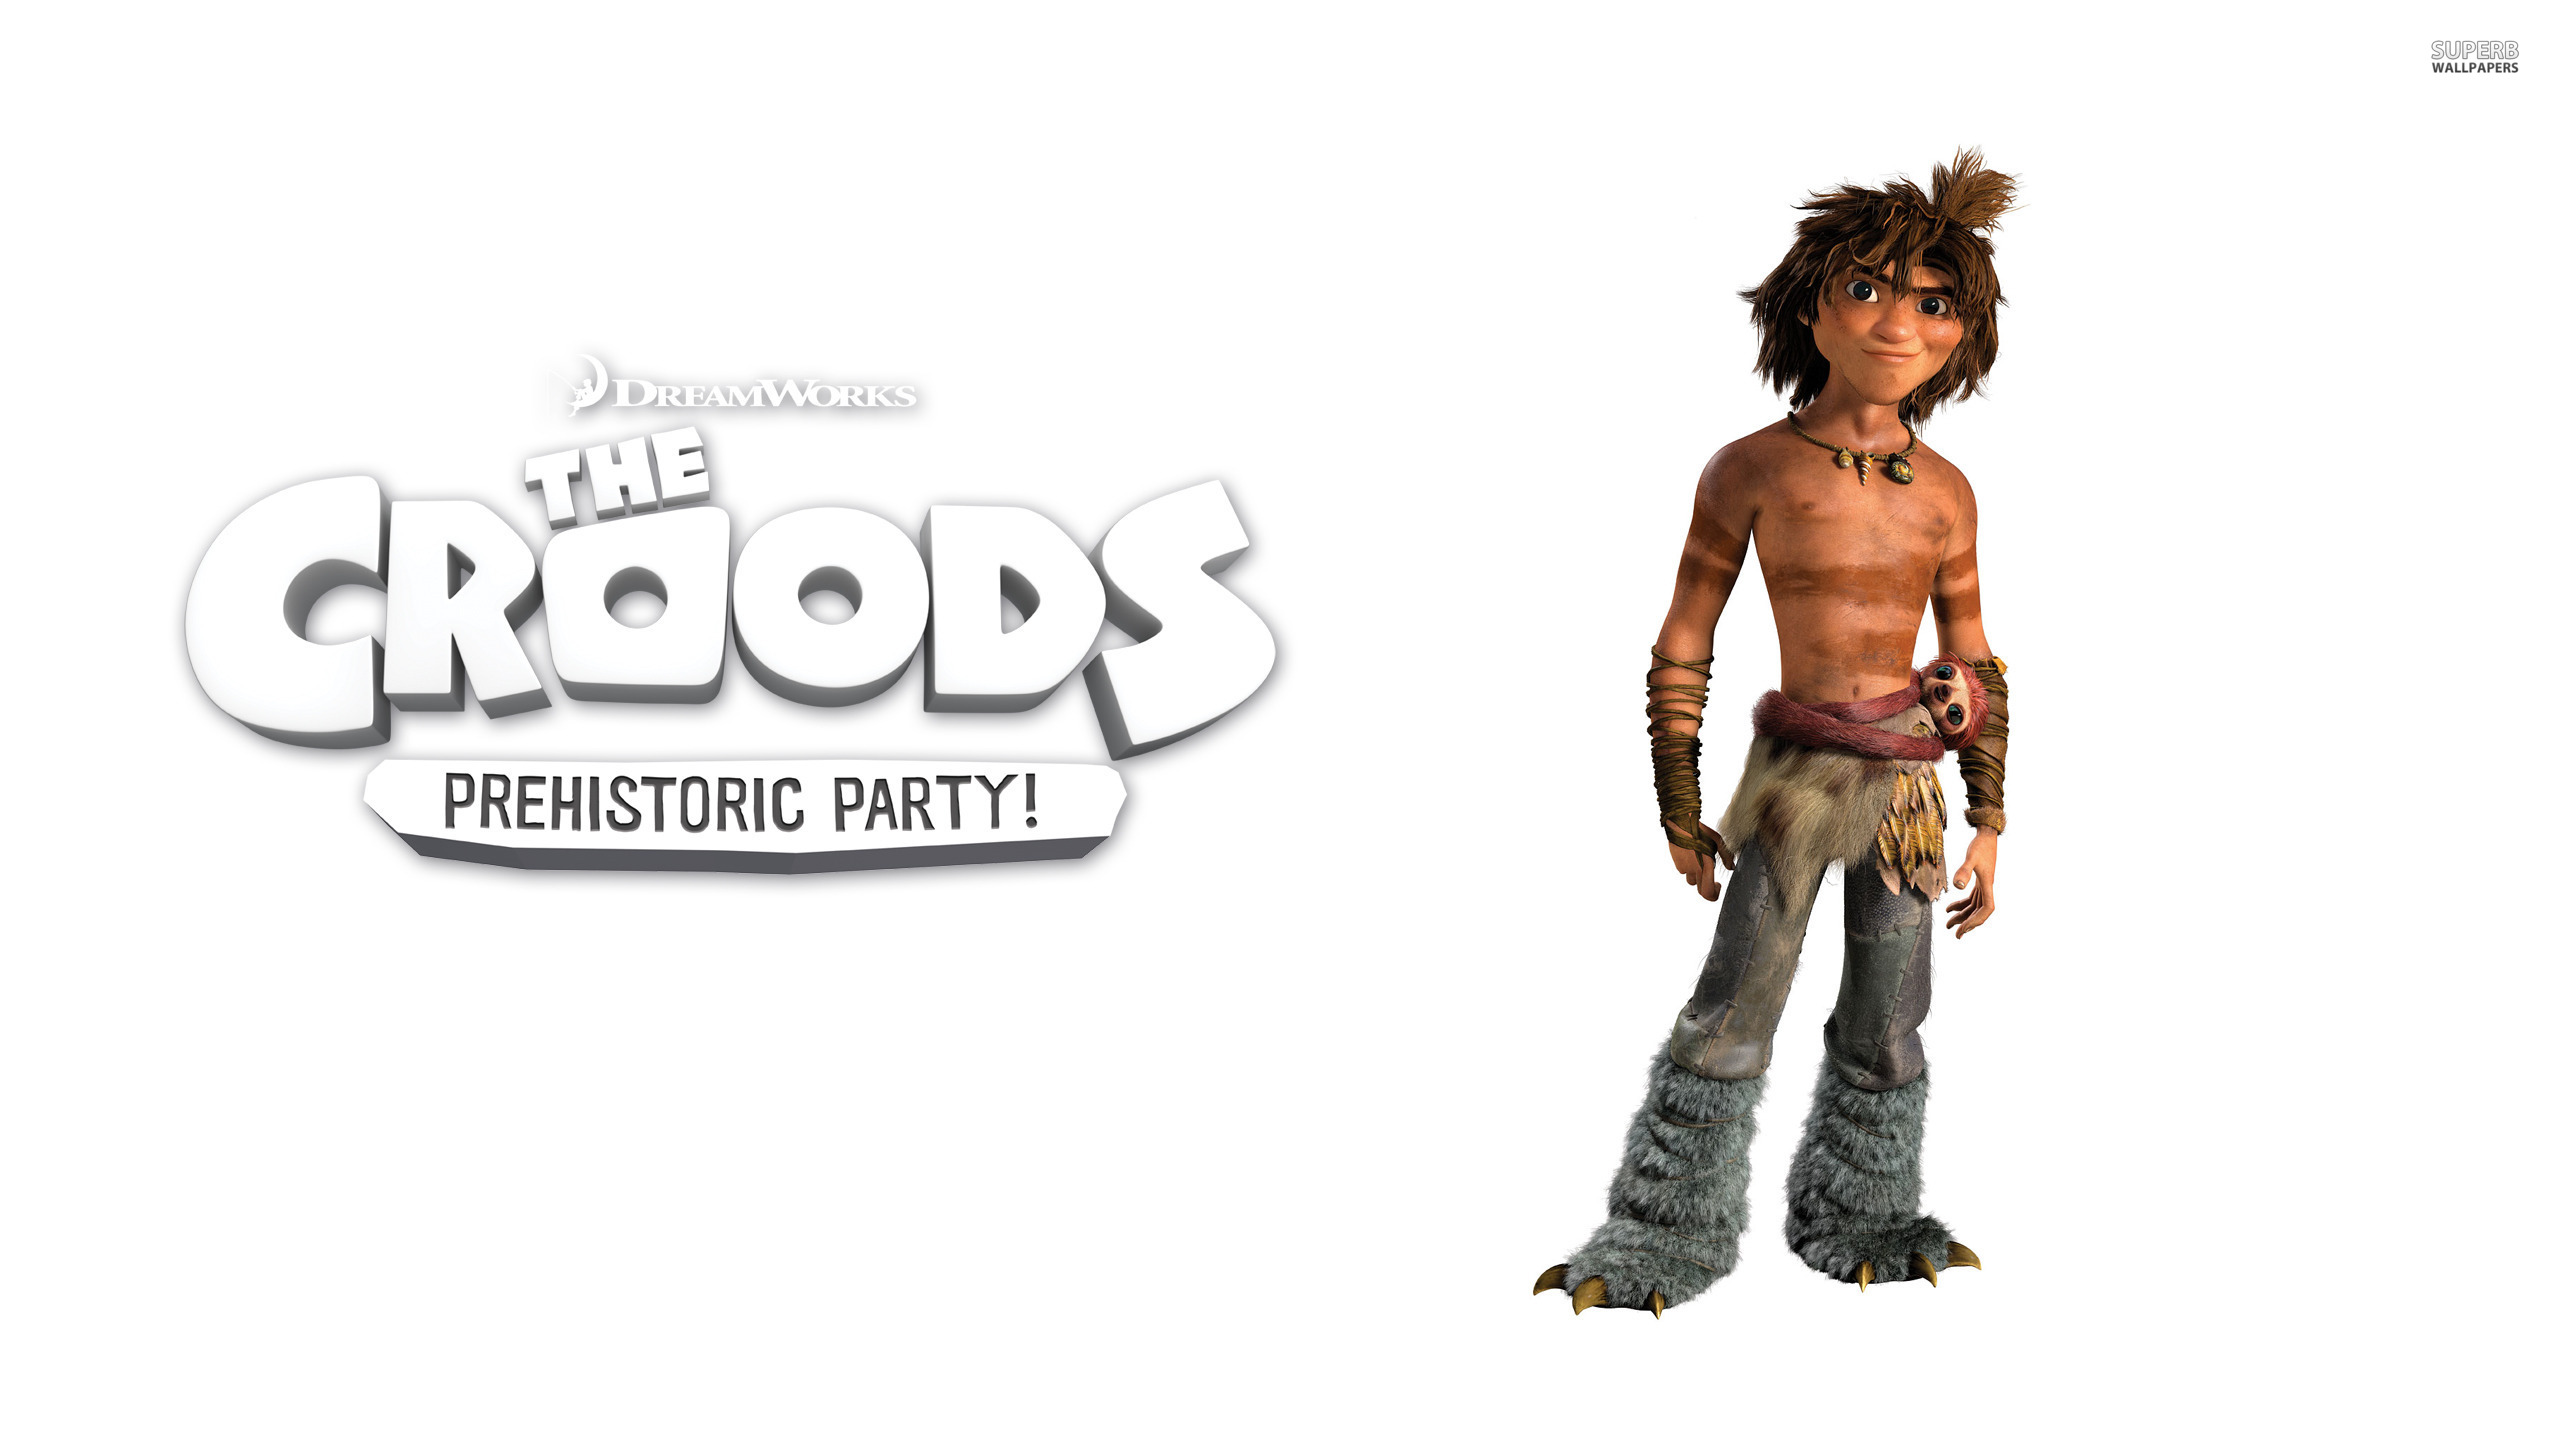 movie, the croods, guy (the croods)